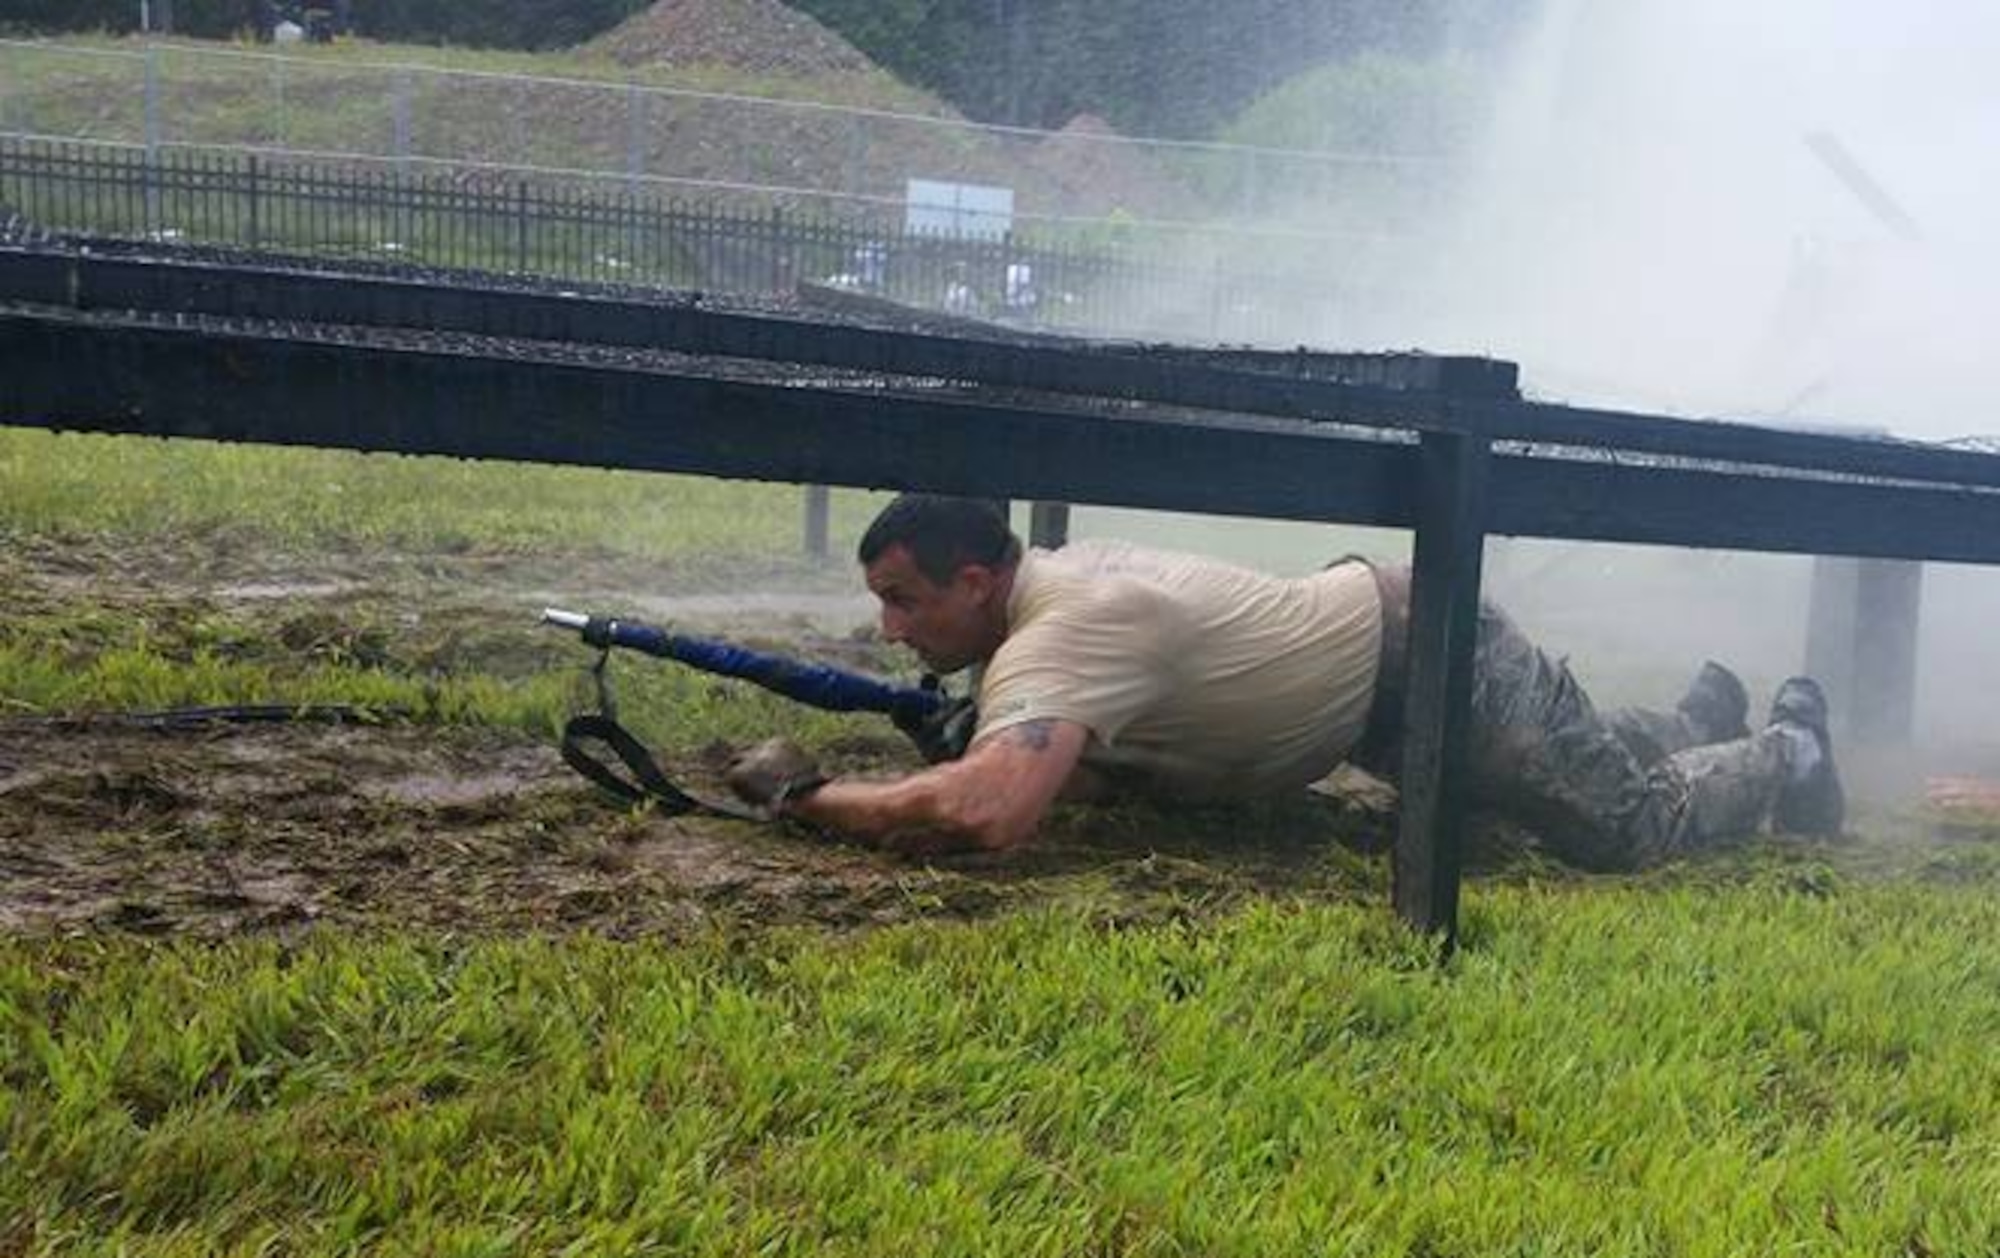 Tech. Sgt. Ian McMahon belly crawls with the unit's guidon through the water tunnel obstacle during the annual competition, CT SWAT Challenge. Select members of the 103rd Security Forces Squadron banded up to compete in the challenge at two venues, the State Police Metacon Range in Simsbury and the MDC Reservoir in West Hartford, Conn., Sept. 17-21, 2015. (U.S. Air National Guard photos by Tech. Sgt. Jessica Roy)